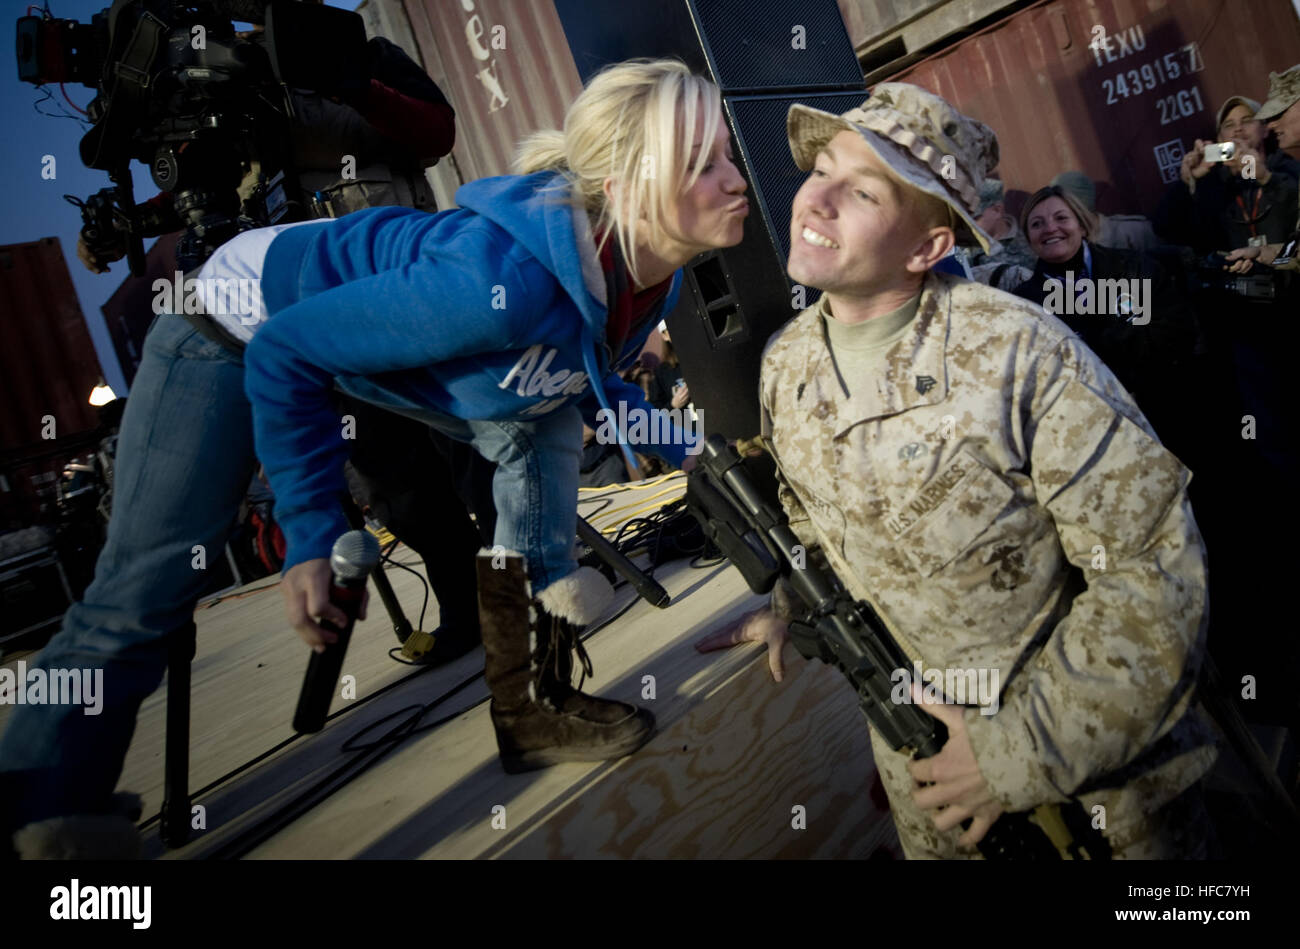 081219-N-0696M-394 American Idol contestant and country musician Kellie Pickler grants a Christmas wish for a kiss to U.S. Marine Sgt. Christopher Lambert at the   2008 USO Holiday Tour stop at Al Asad Air base, Iraq, Dec. 19, 2008. Tour host U.S. Navy Adm. Mike Mullen, chairman of the Joint Chiefs of Staff and his wife Deborah welcomed musician Zack Brown; comedians John Bowman, Kathleen Madigan and Lewis Black; actress Tichina Arnold; and Grammy award winning musician Kid Rock on the tour bringing music and entertainment to service members and their families stationed overseas. (DoD photo by Stock Photo